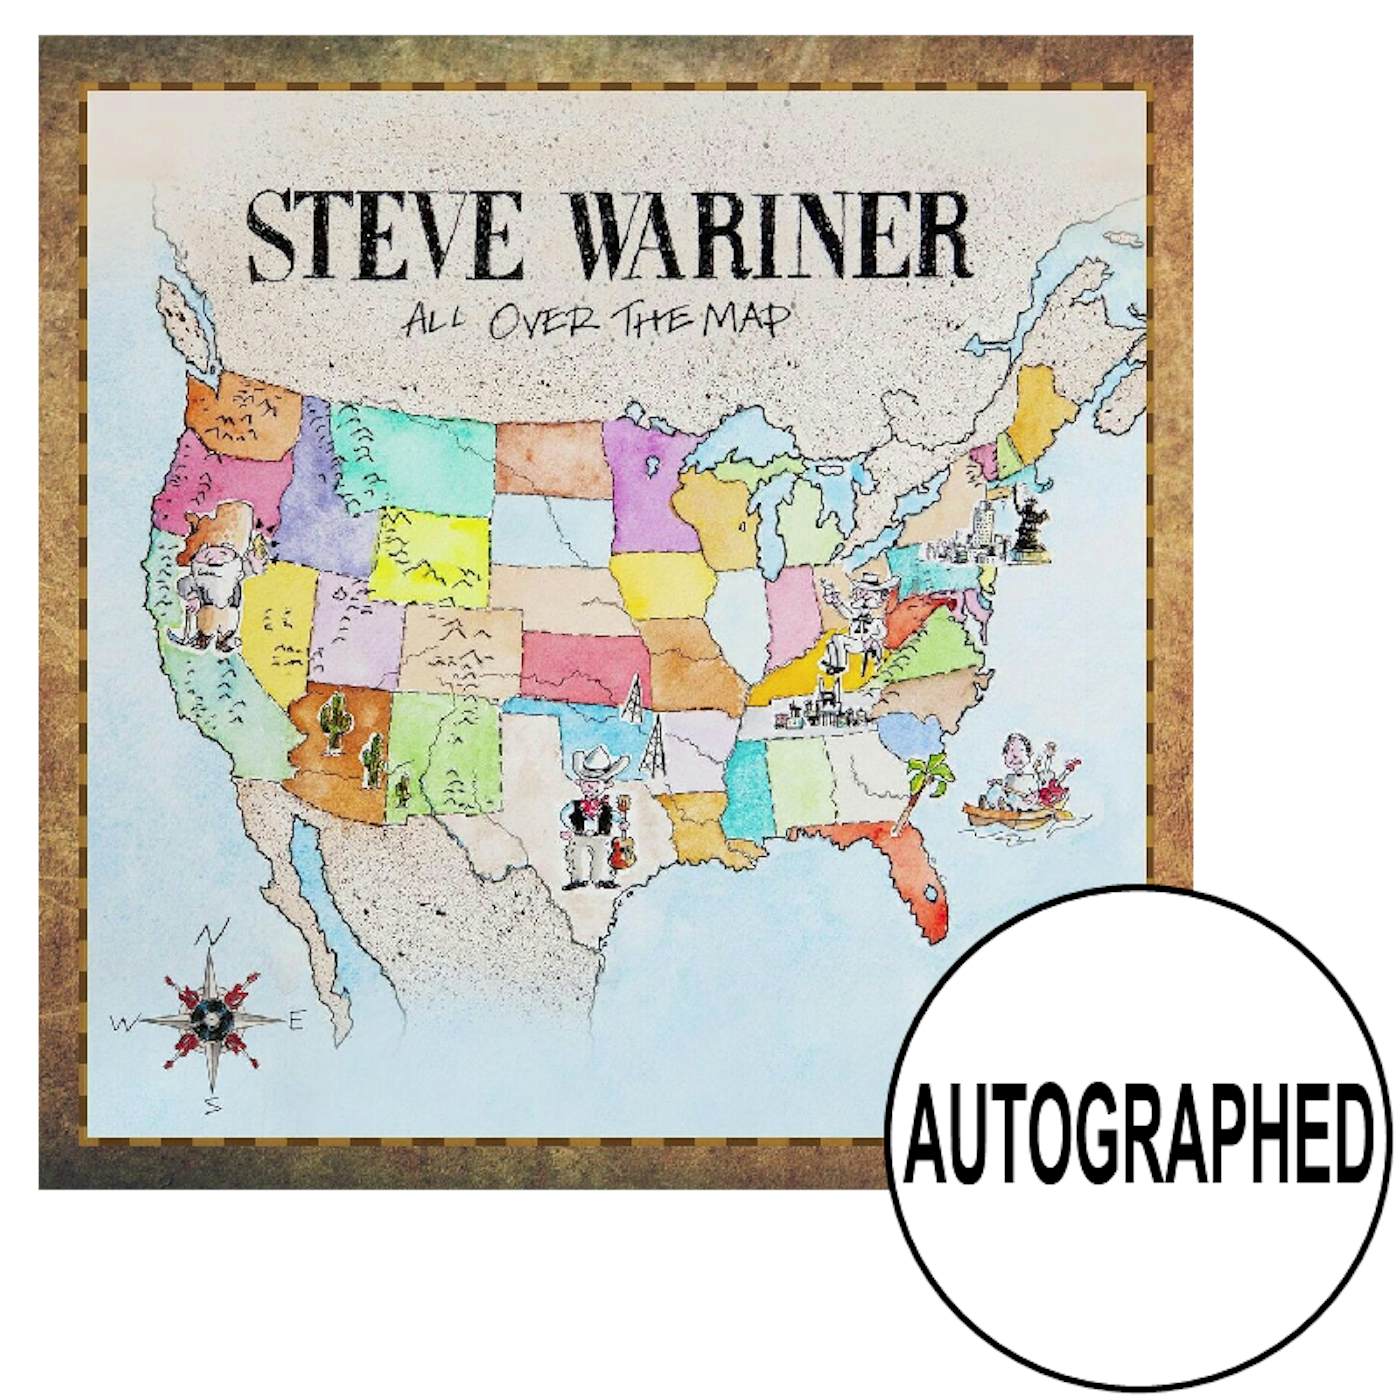 Steve Wariner AUTOGRAPHED CD- All Over the Map